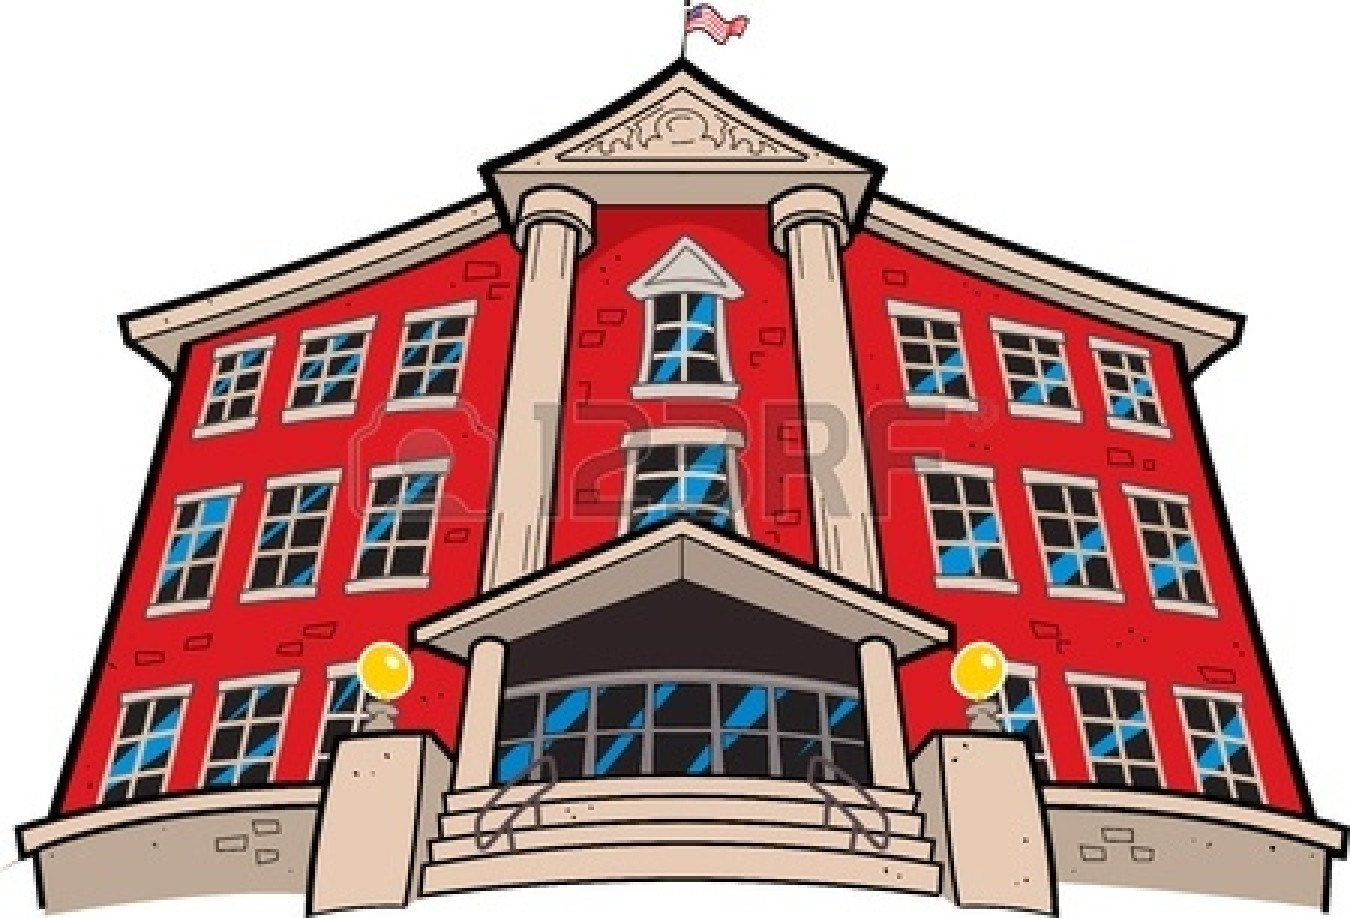 College Building Images   Clipart Panda   Free Clipart Images